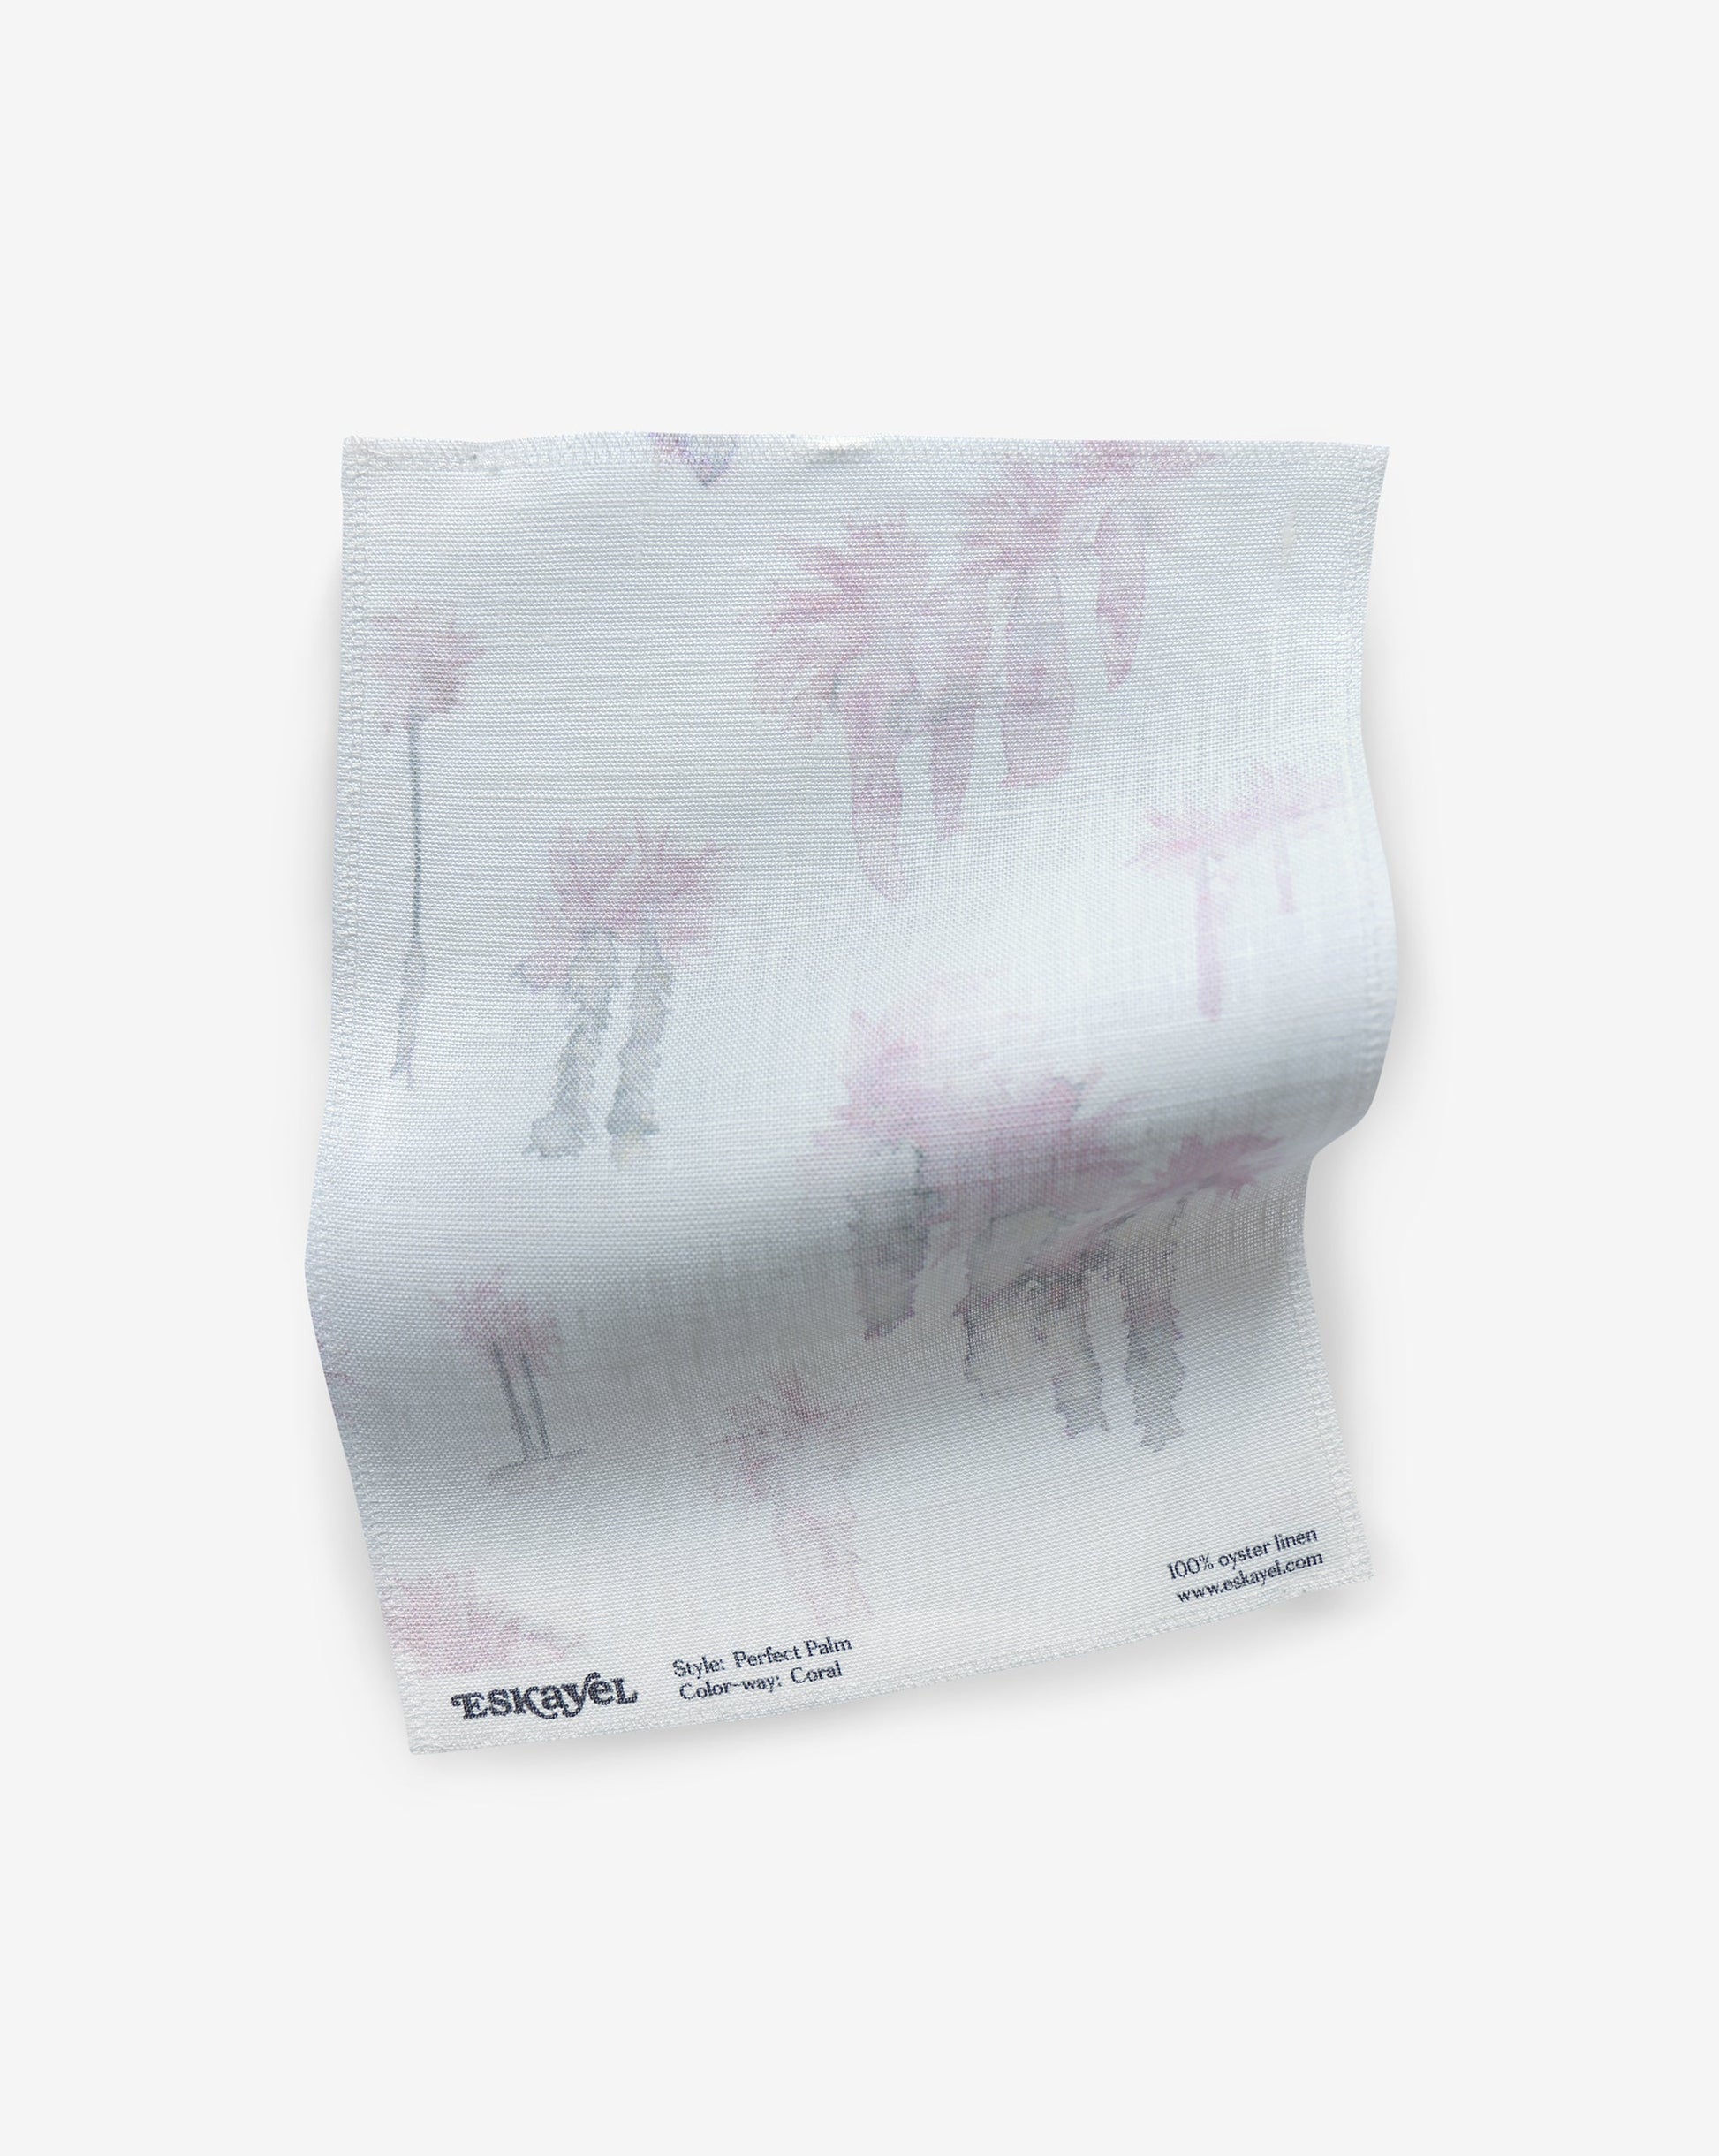 A white Perfect Palm Fabric Sample||Coral towel with pink palm trees on it.